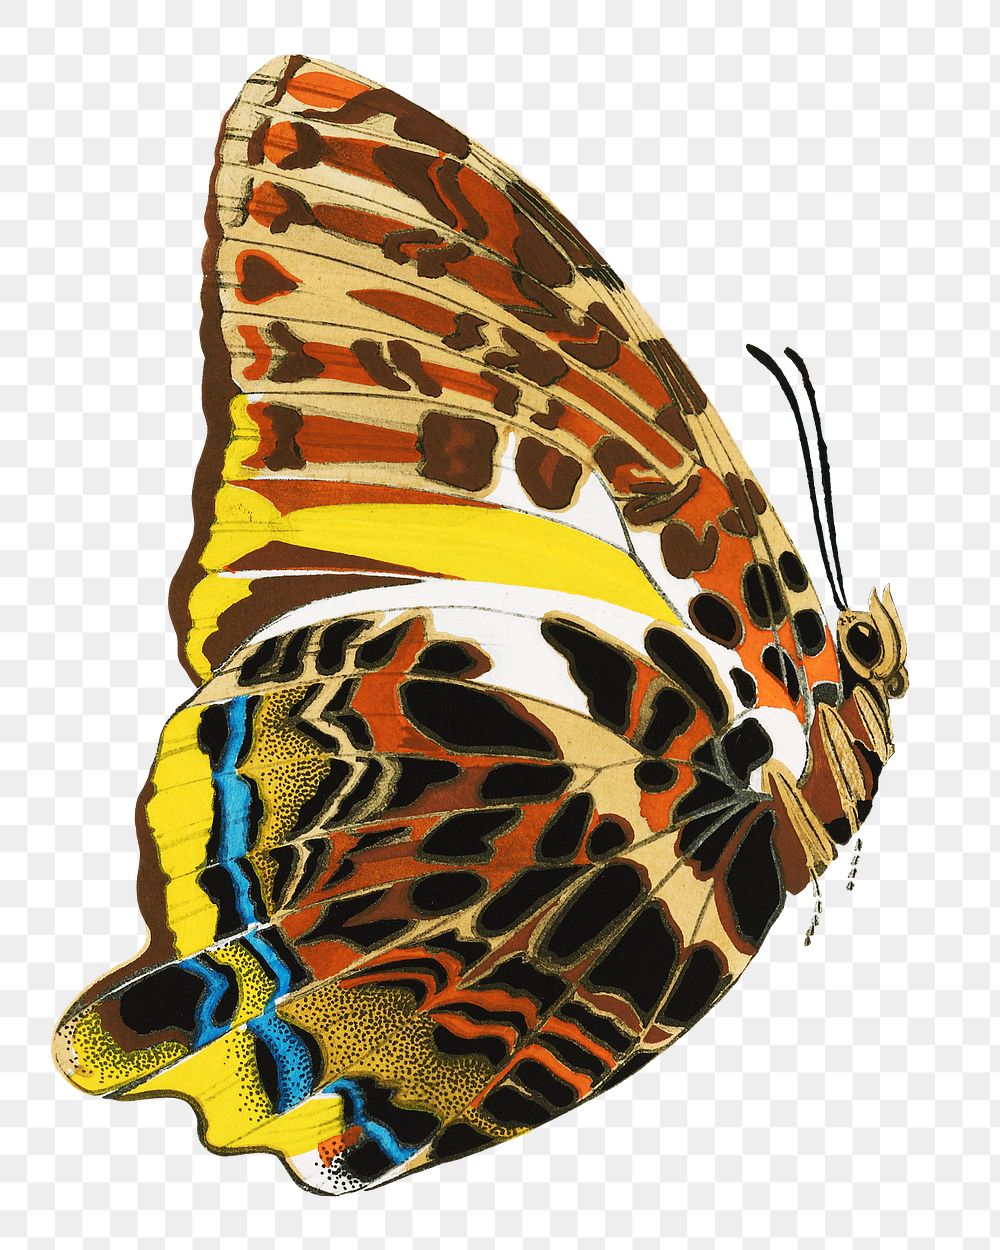 E.A. S&eacute;guy's butterfly png sticker, exotic insect on transparent background. Remixed by rawpixel